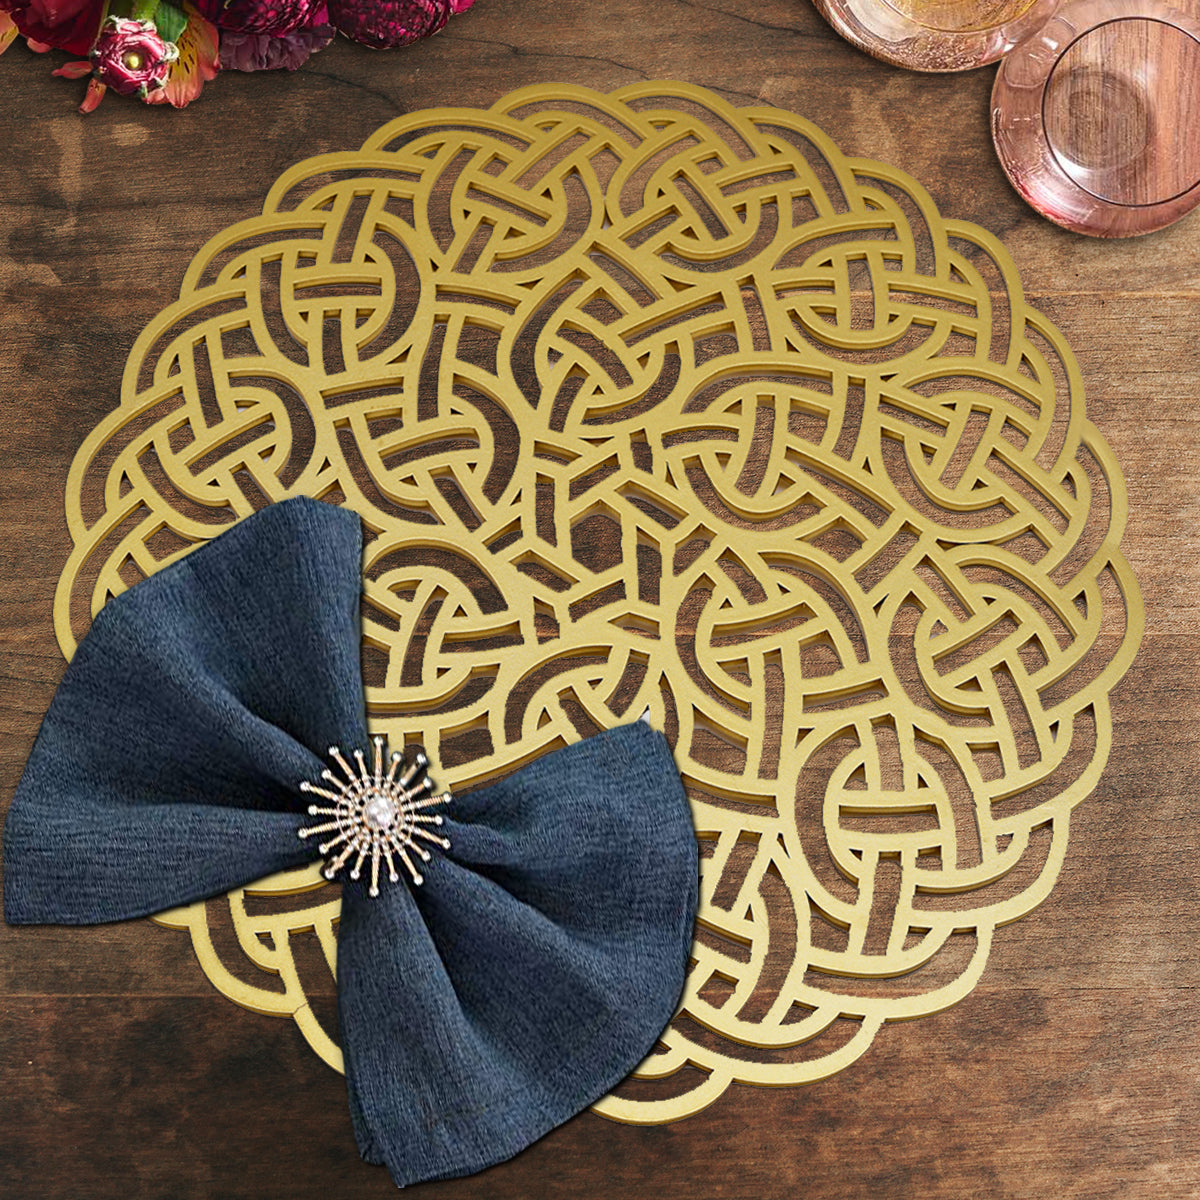 Gold Wooden Trivet Placemats for Dining Table - Decozen